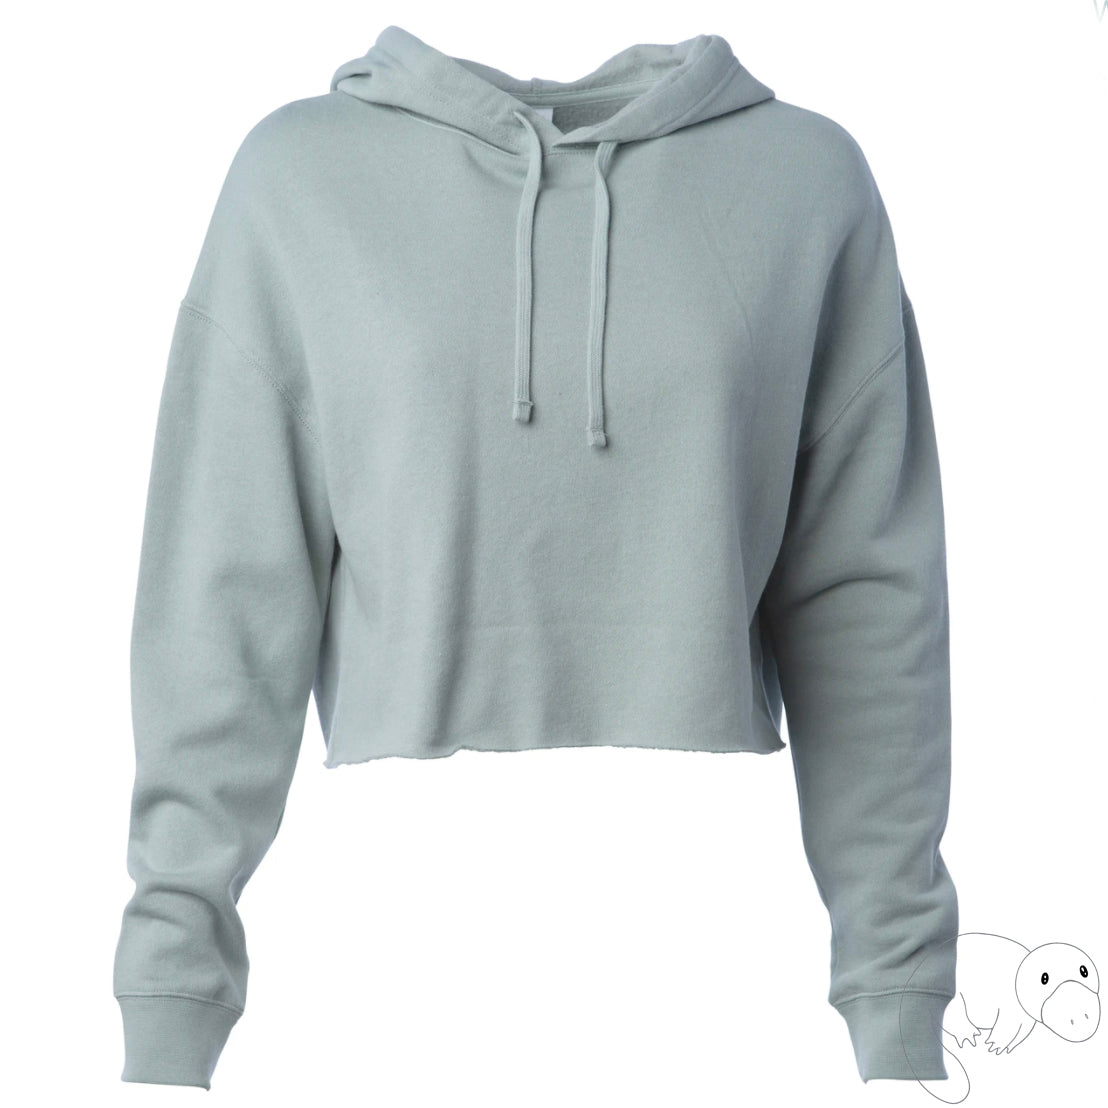 sweatshirt-green-seafoam-mint-crop-light-fuzzy-soft-hoodie-face-mask-Plats-Hoodie-facemask-all-in-one-convertible-hoodiefacemask-platinum-platypus-new-product